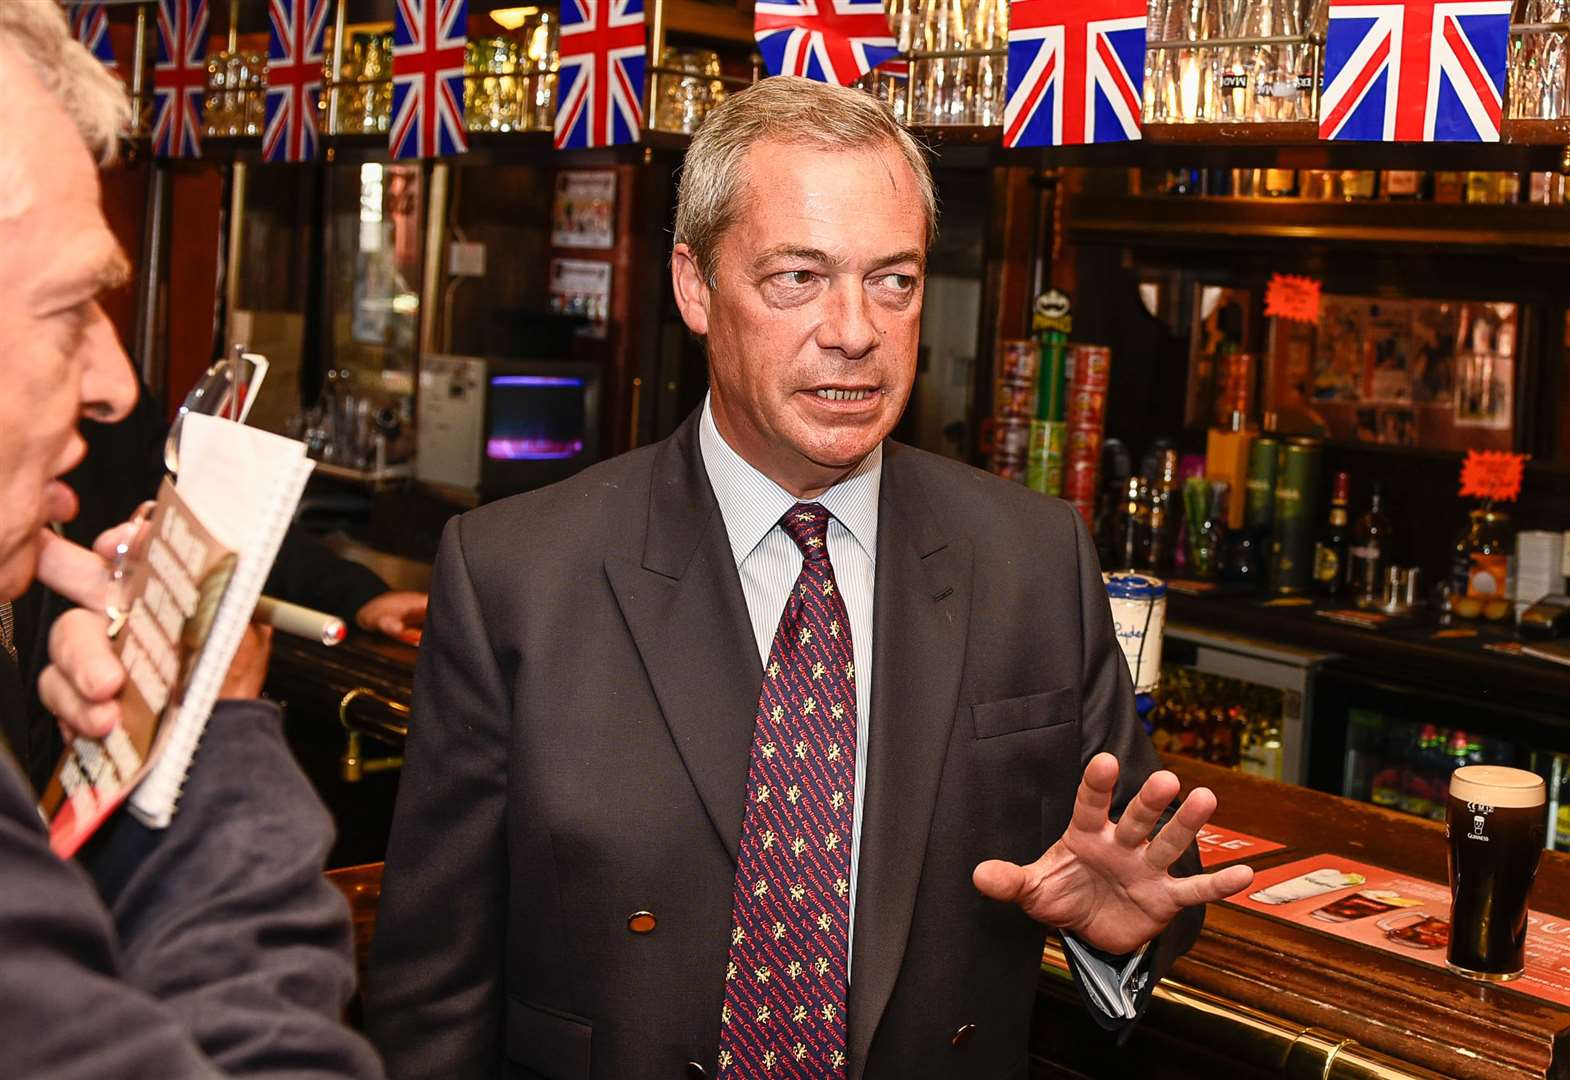 Nigel Farage at the bar in the Belle Vue pub in Cliftonville during his Brexit campaign